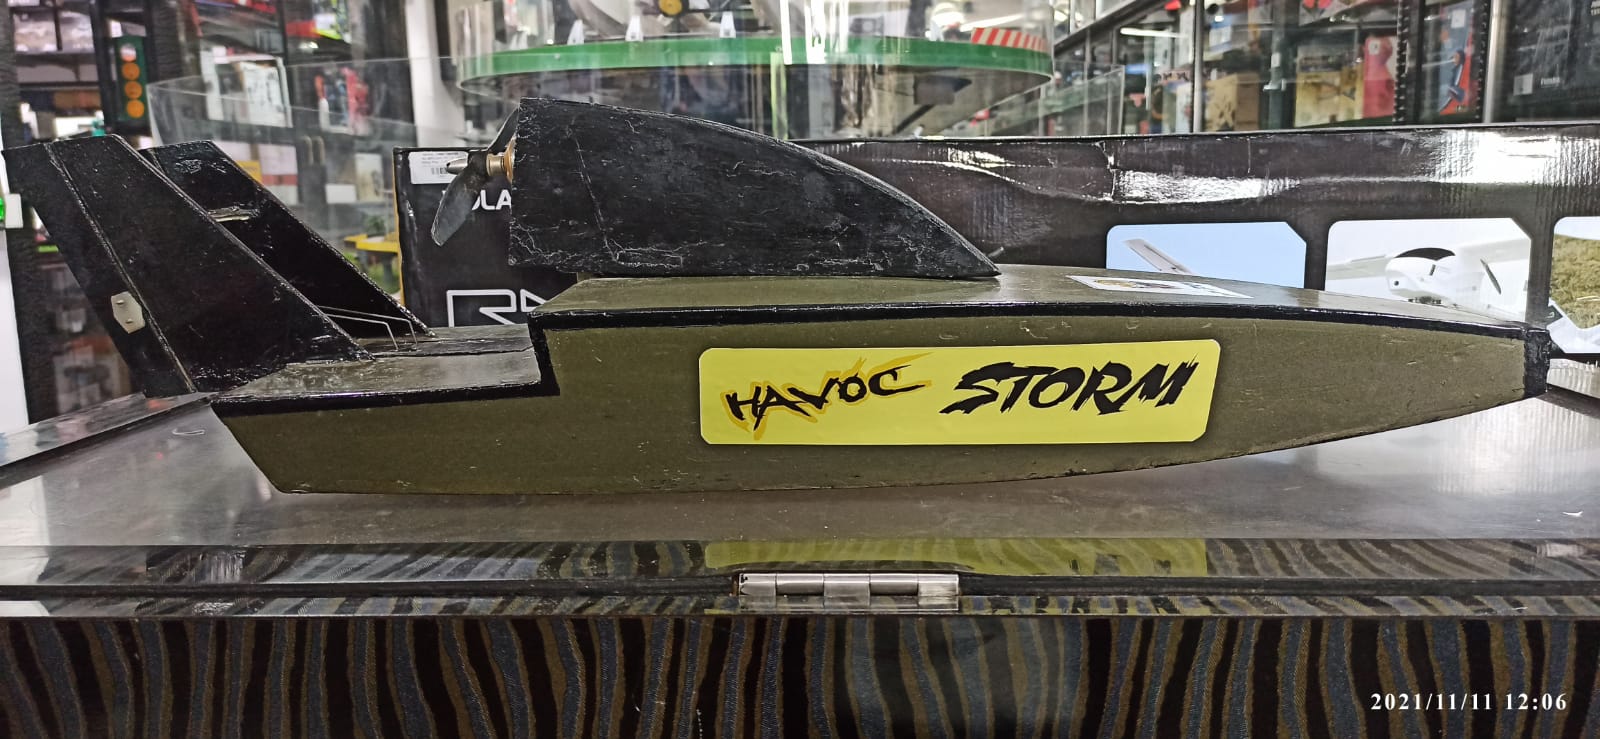 HAVOC STORM RC BOAT BE01 DARK GRAY (QUALITY PRE OWNED)